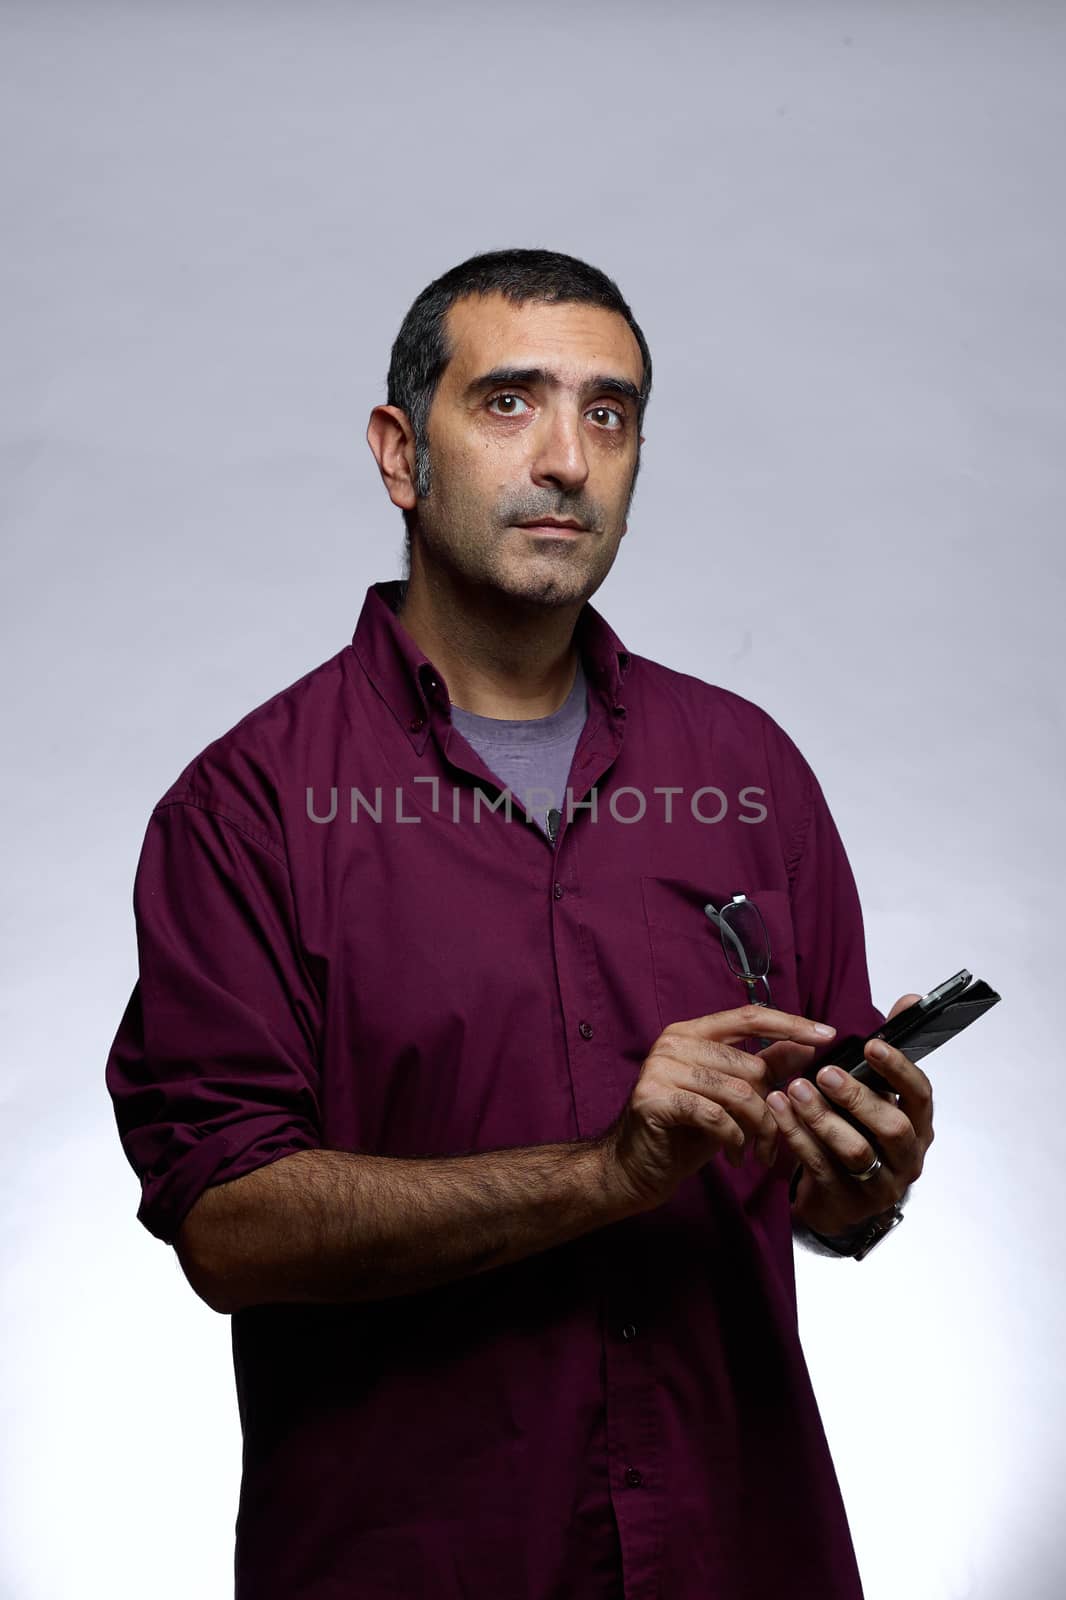 facial expression adult man in purple shirt